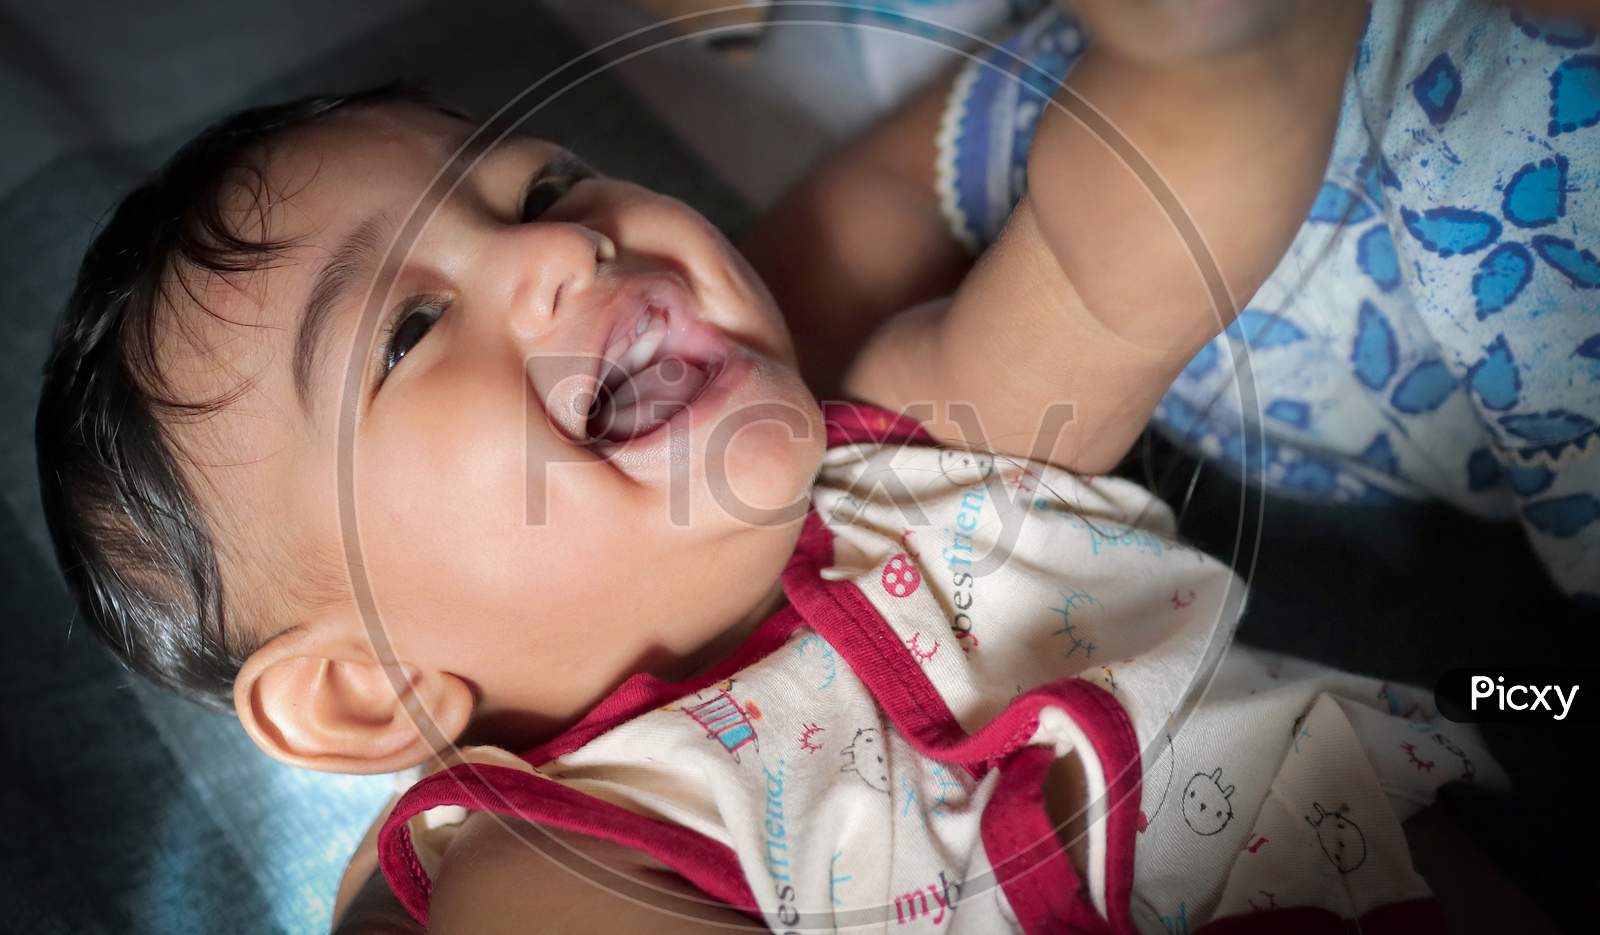 A Toddler Indian Baby Boy Smiling With First Tooth Visible On Upper Jaw With Selective Focus On Eyes